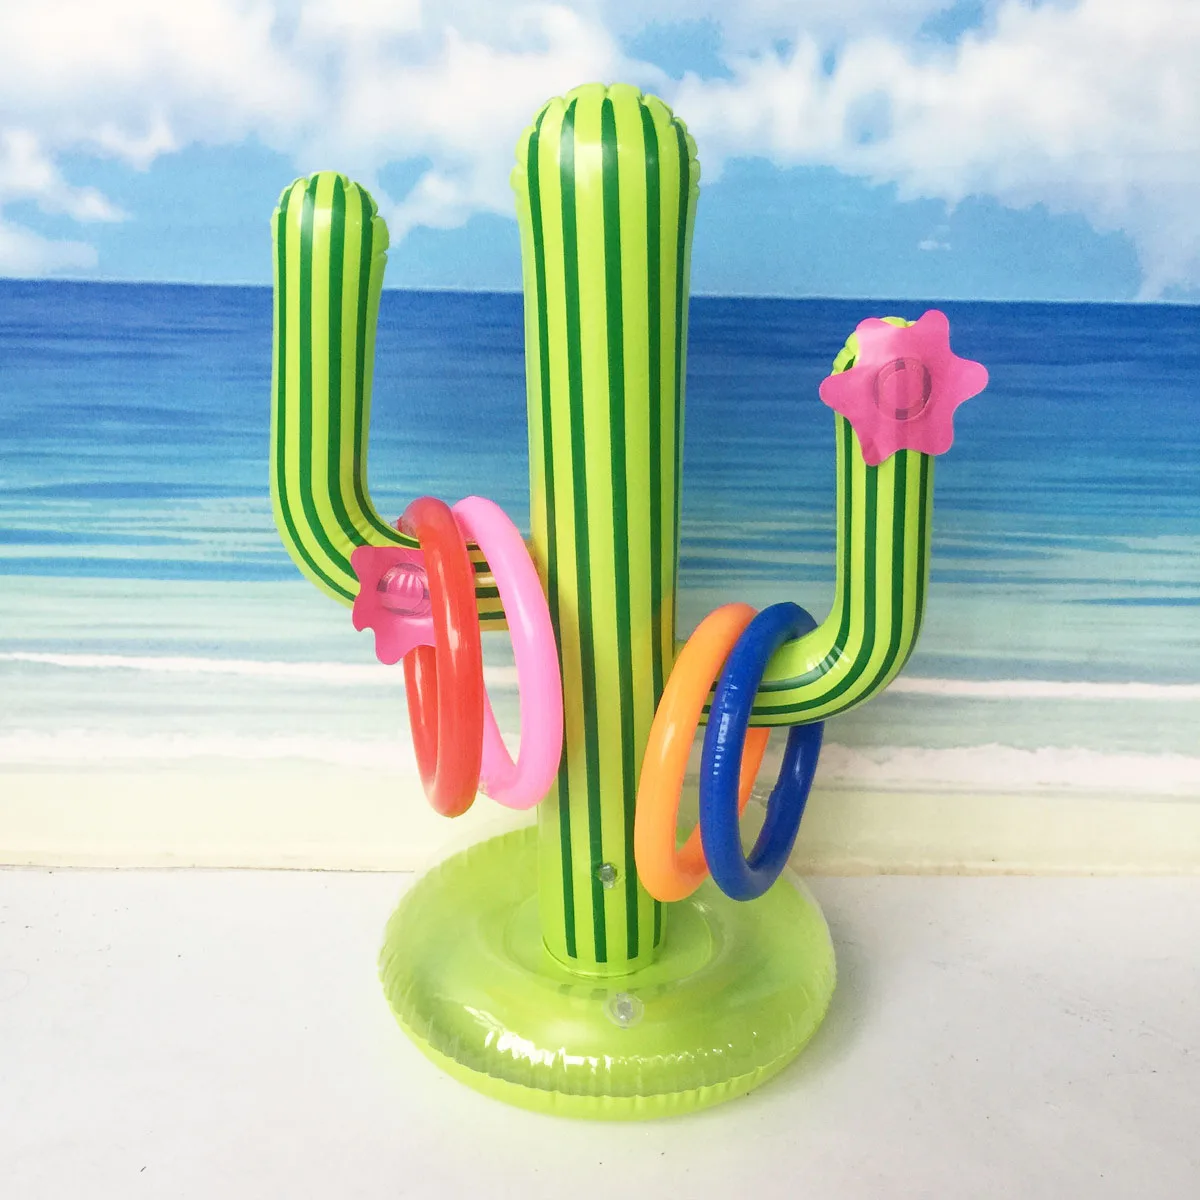 Cactus Swimming Pool Ring Toss Games Inflatable Pool Toys With 4 Ring Summer - £9.74 GBP